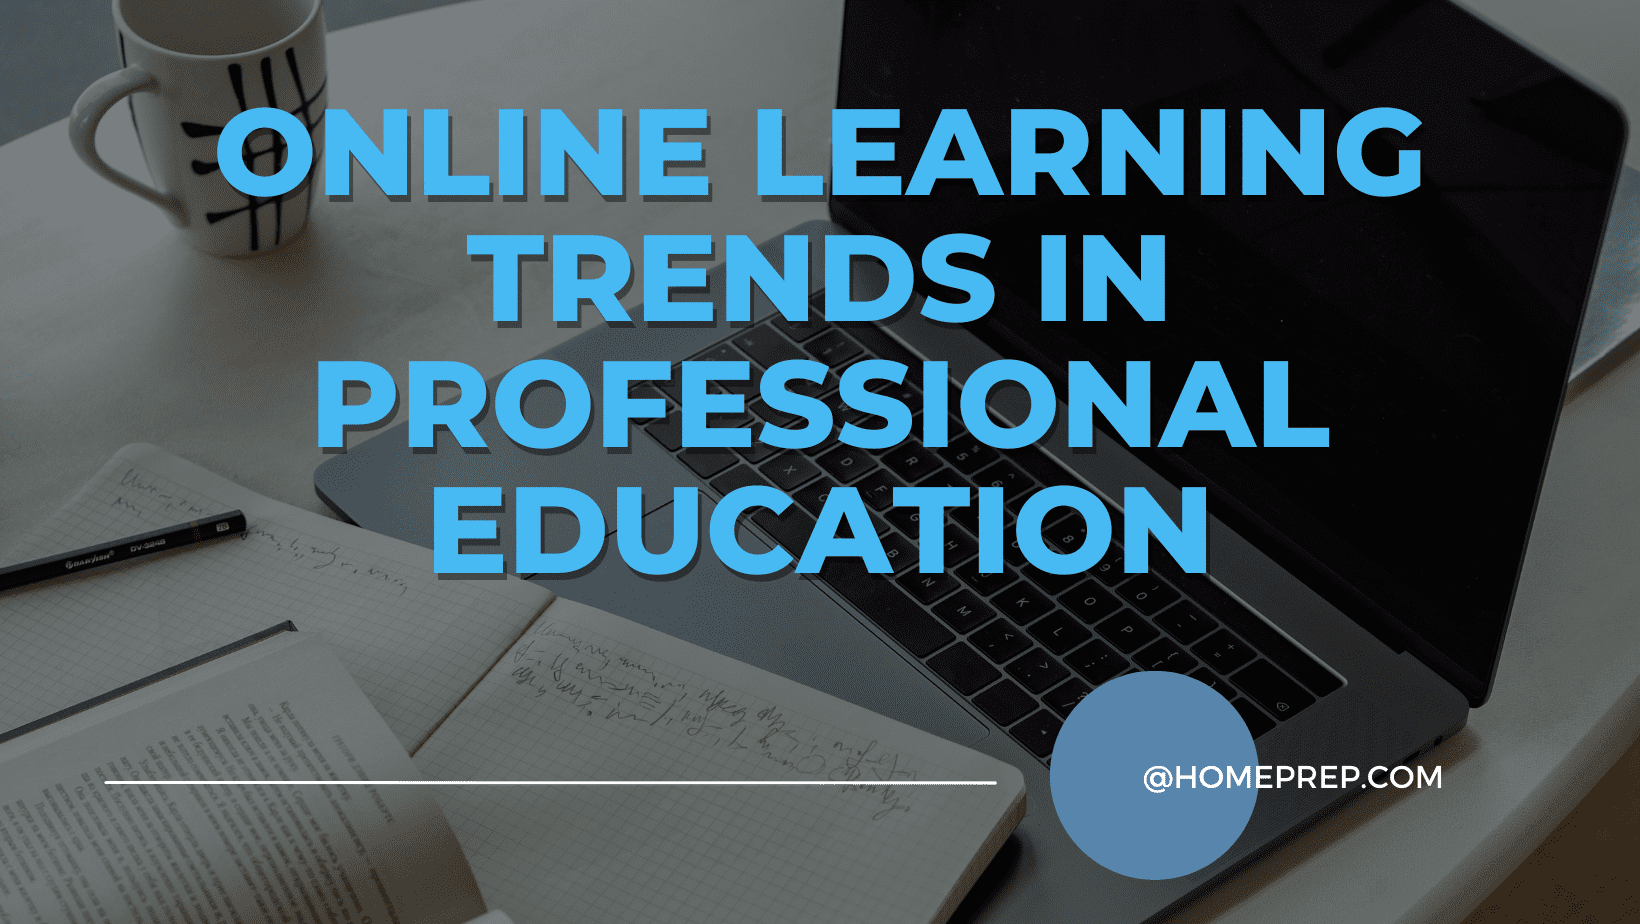 Leading the Way in Professional Online Education: @HomePrep’s Commitment to Online Learning Trends